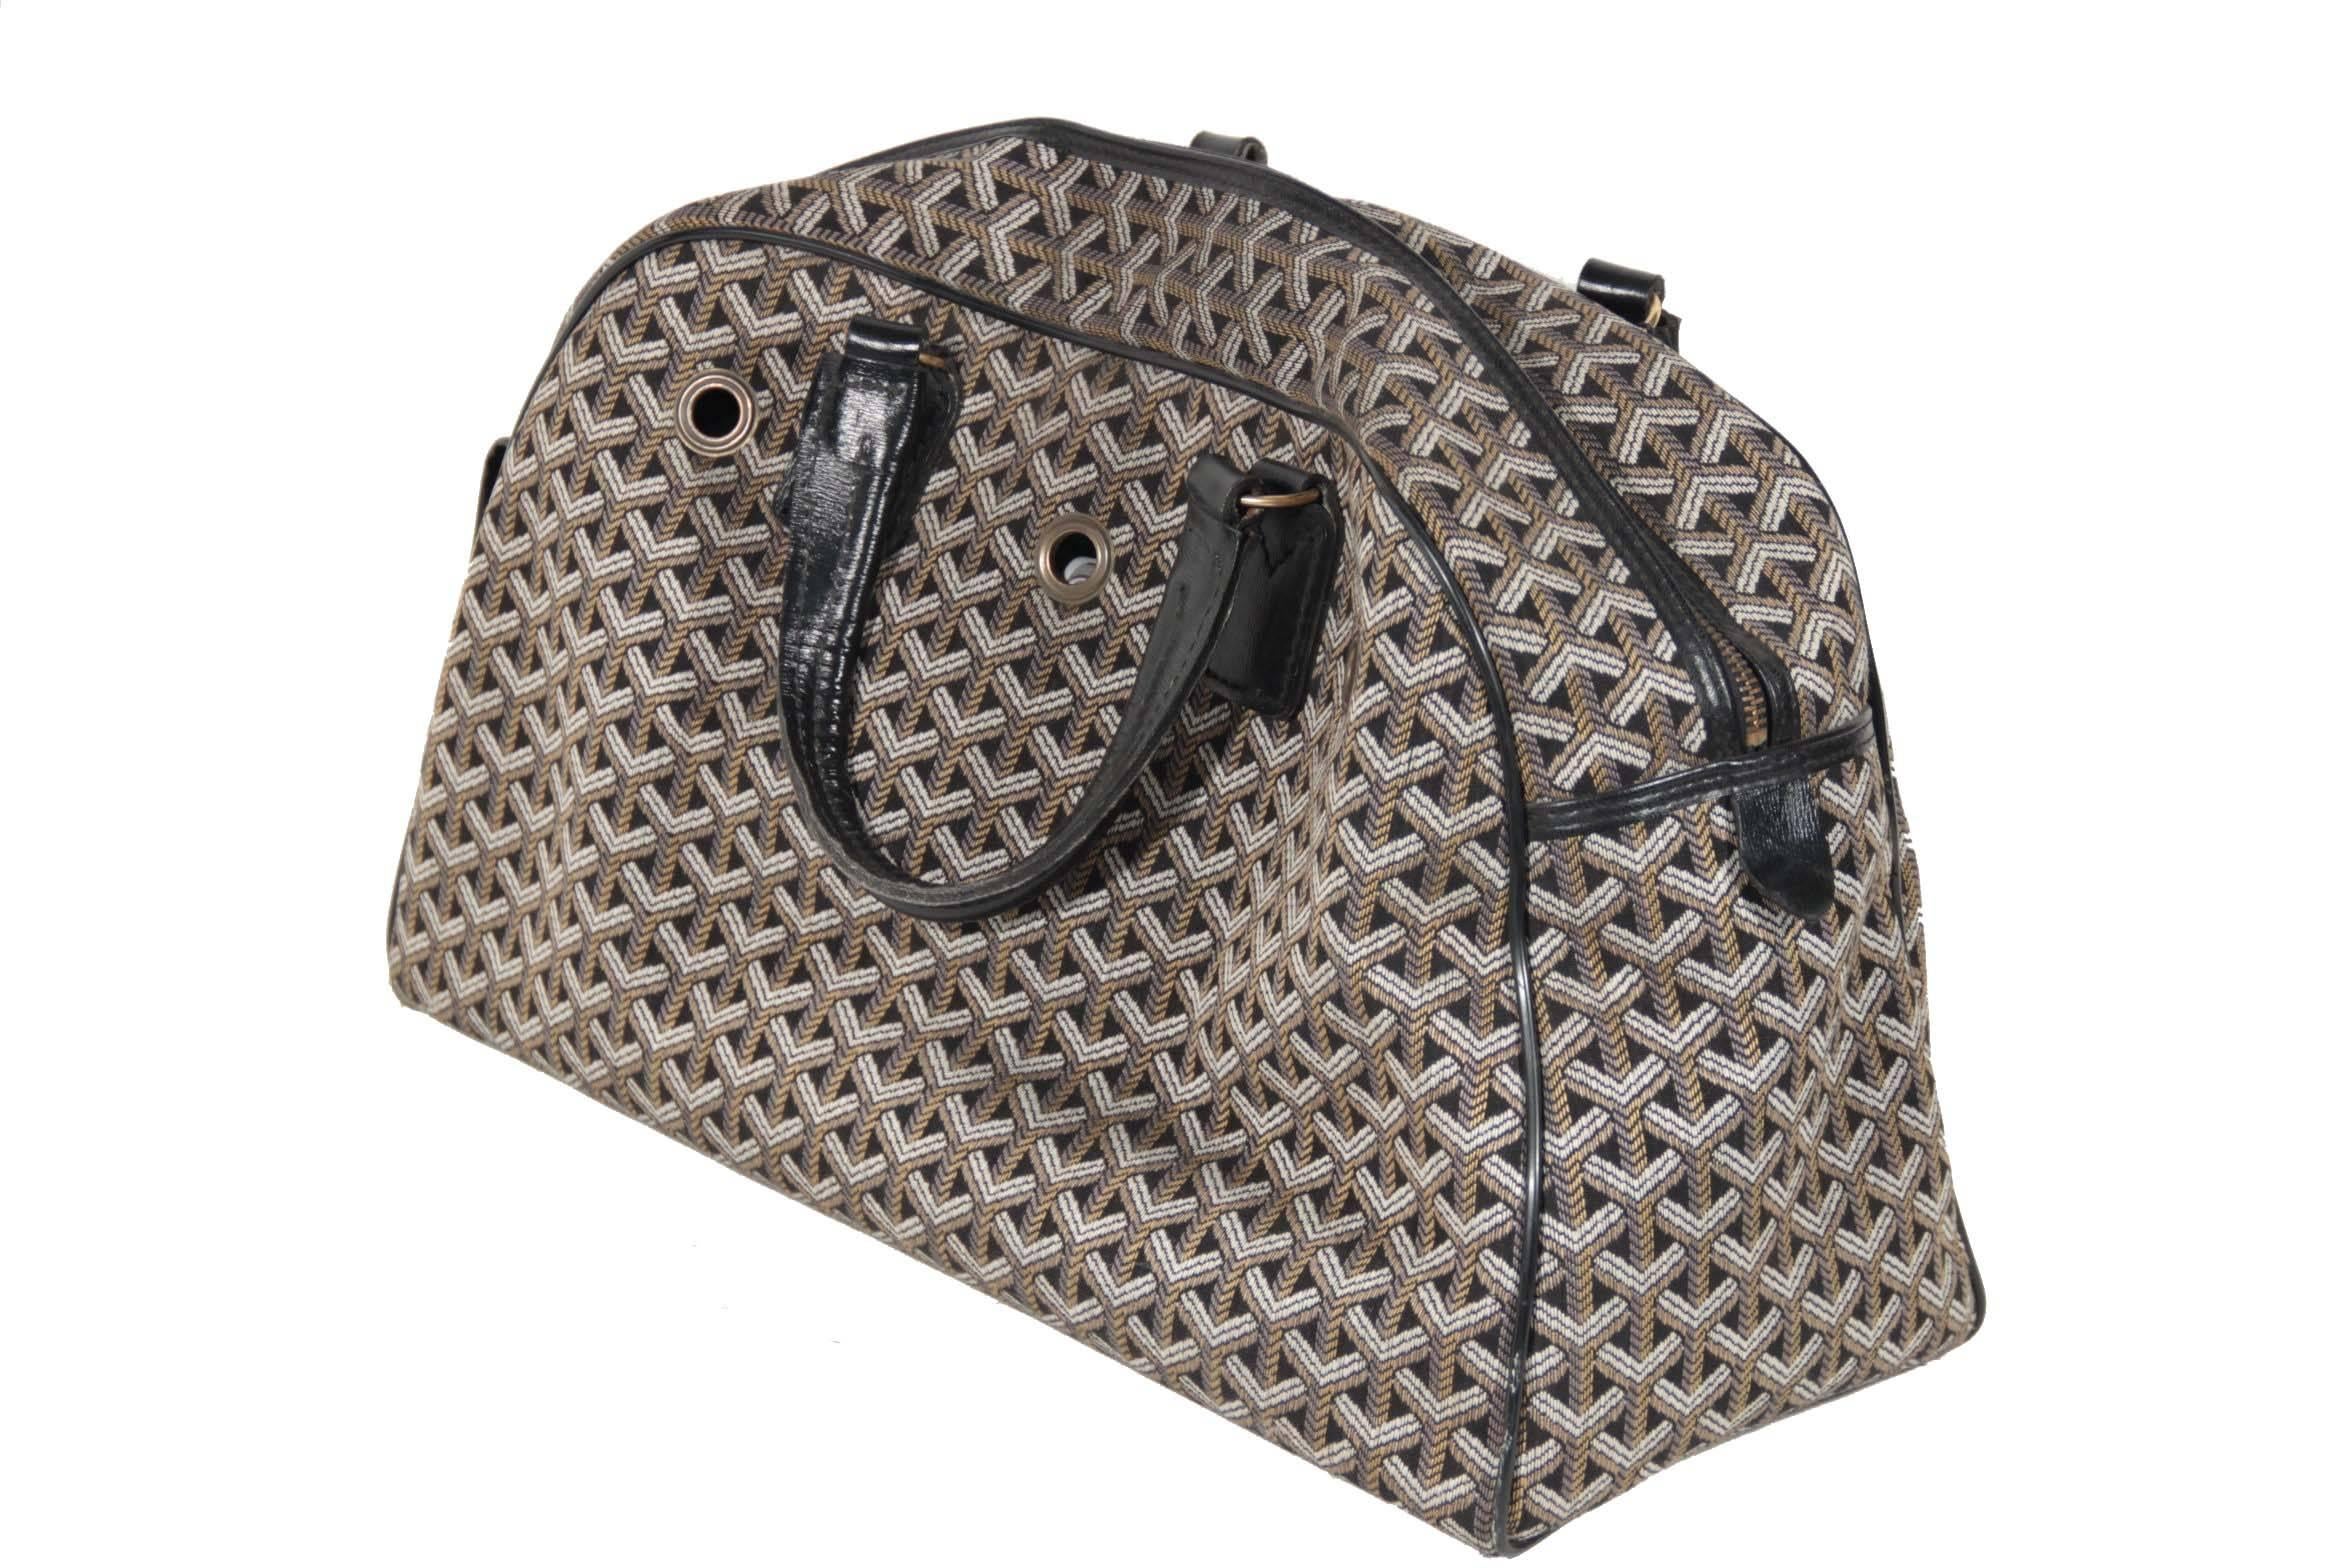  Brand: GOYARD

Condition: B :GOOD CONDITION - Some light wear of use

Condition details: Some wear of use on bottom corners, some normal wear of use inside

Further Comments: Black, white and tan signature chevron canvas 'Monsieur Hulot' Pet